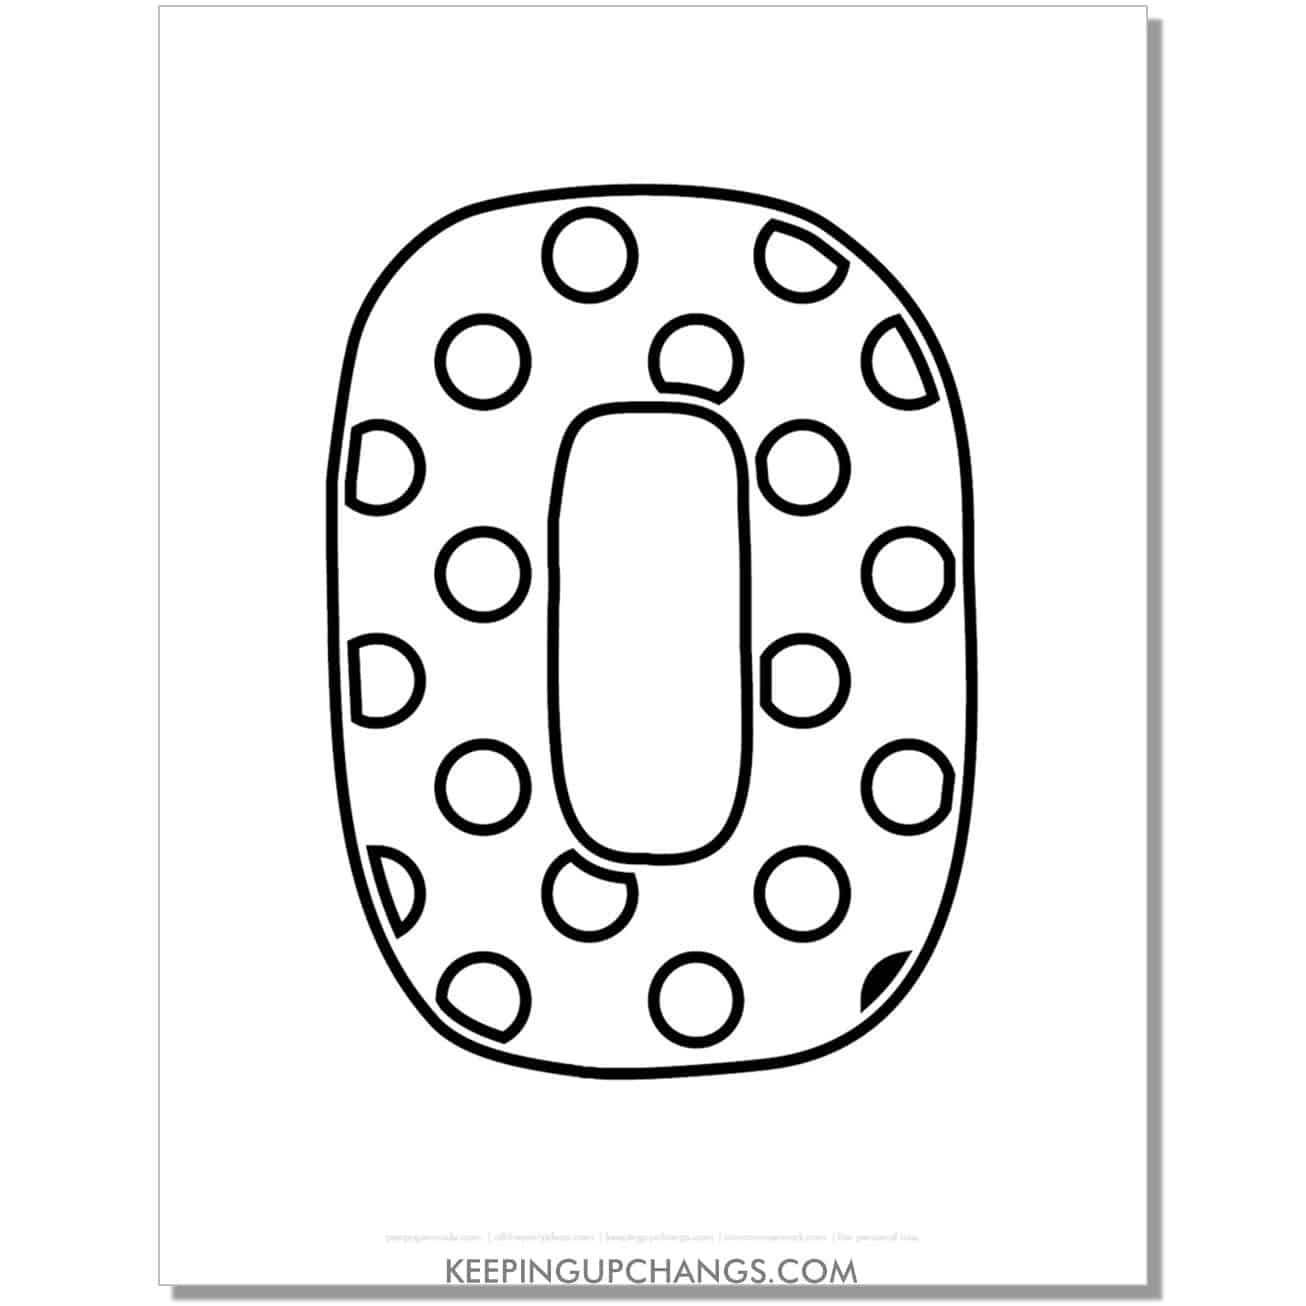 free alphabet letter o coloring page with polka dots for toddlers, preschool, kindergarten.